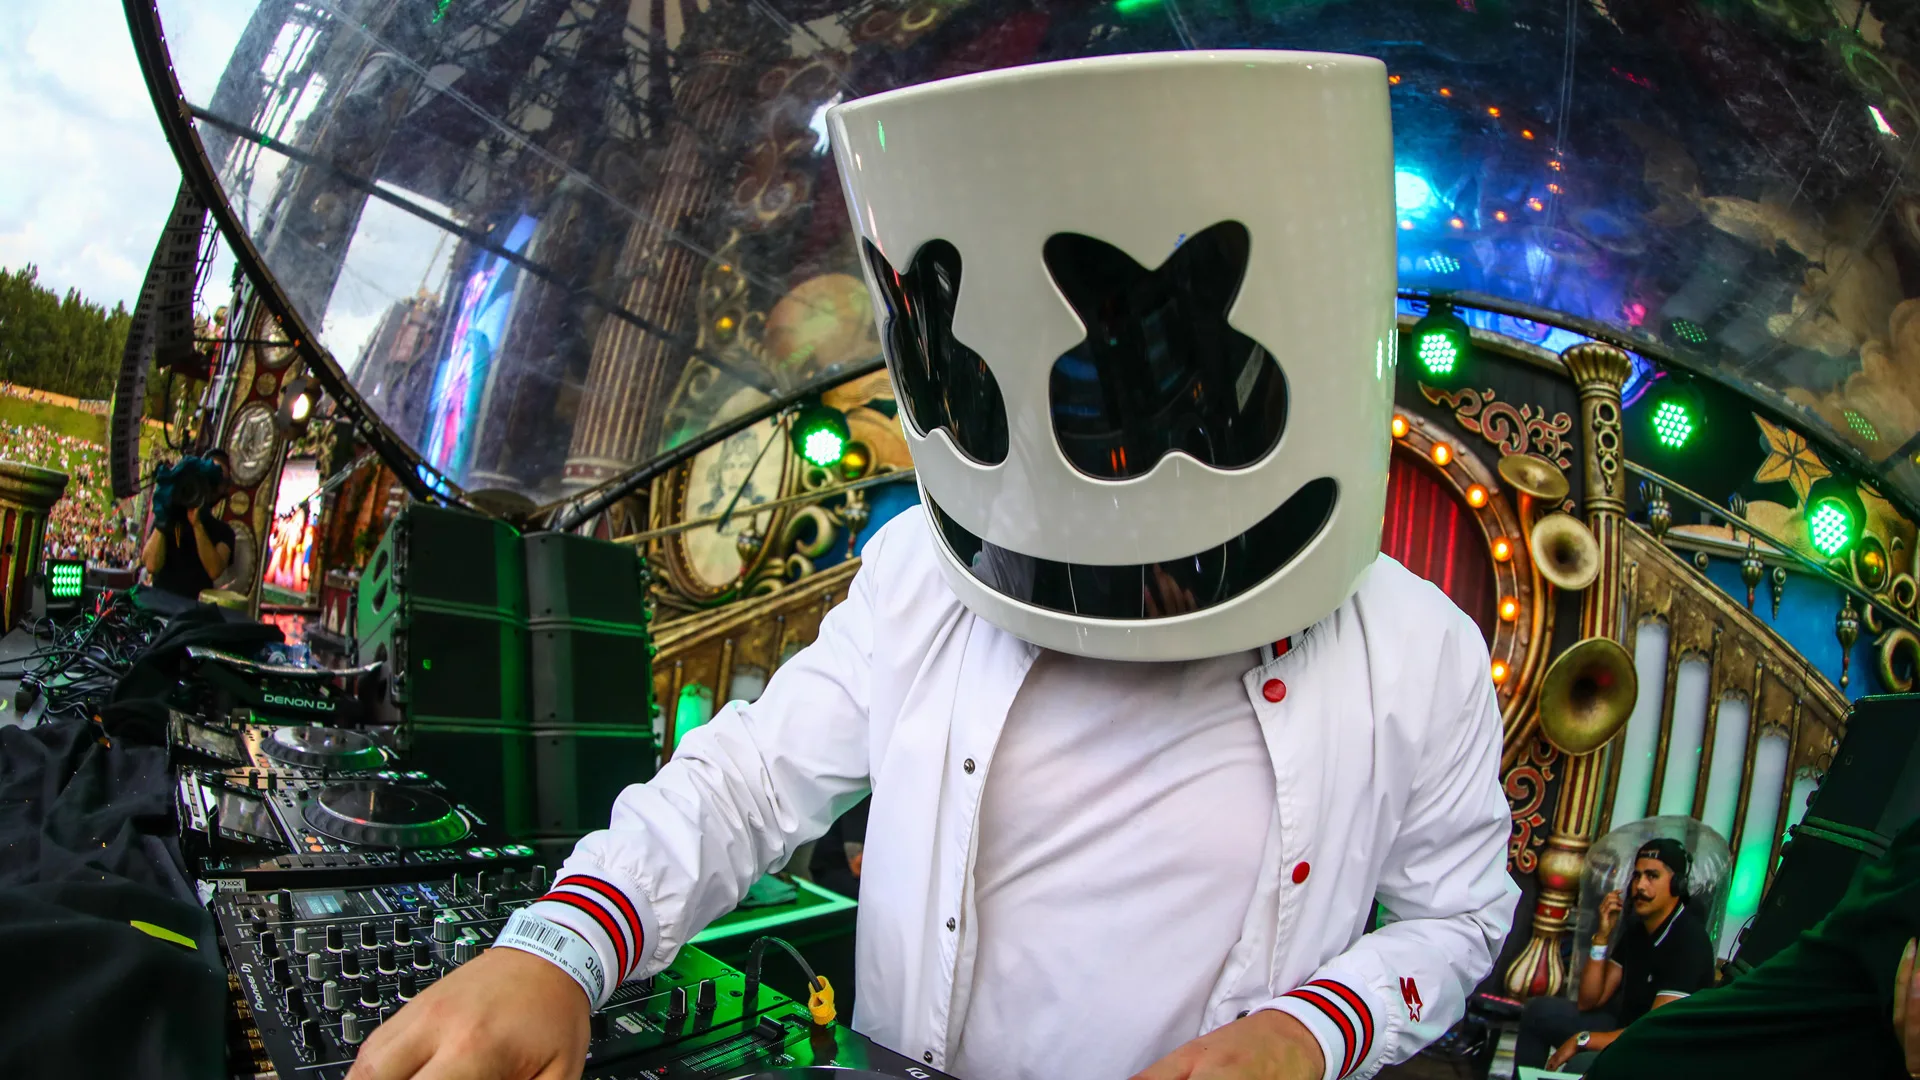 A photograph of the DJ Marshmello performing on decks in his famous white tin can head with black crossed out eyes and smile